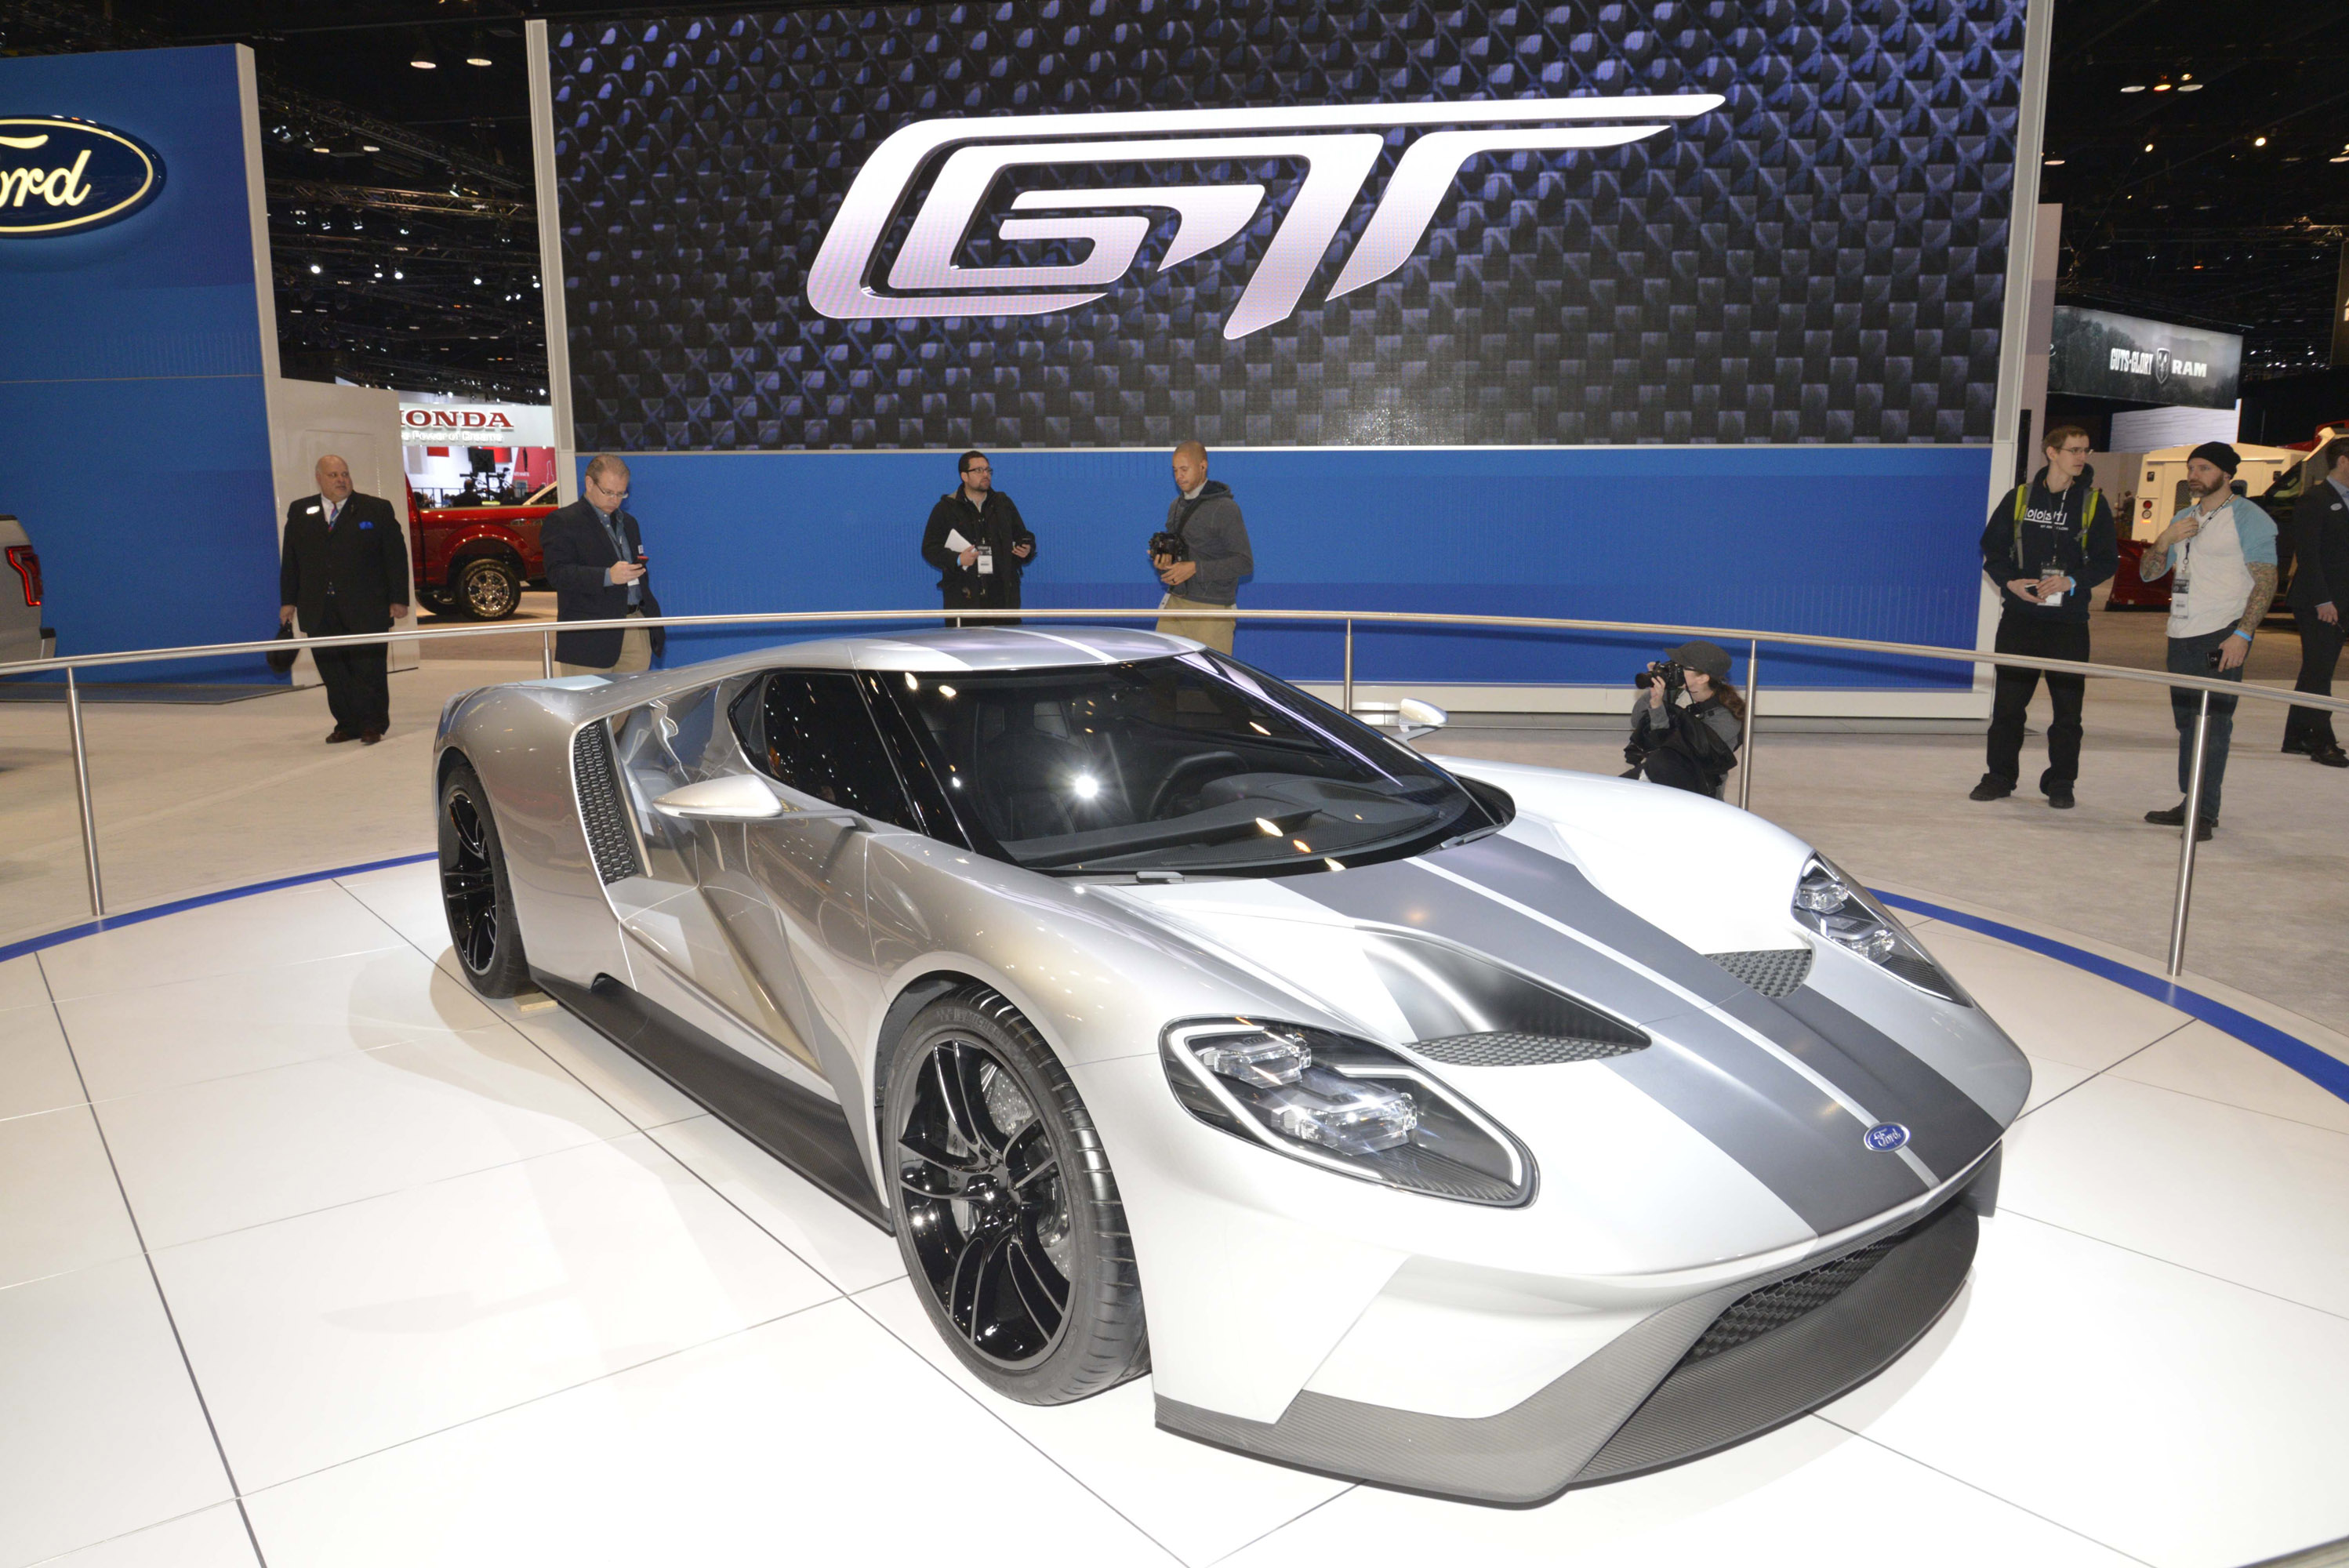 Ford GT Chicago